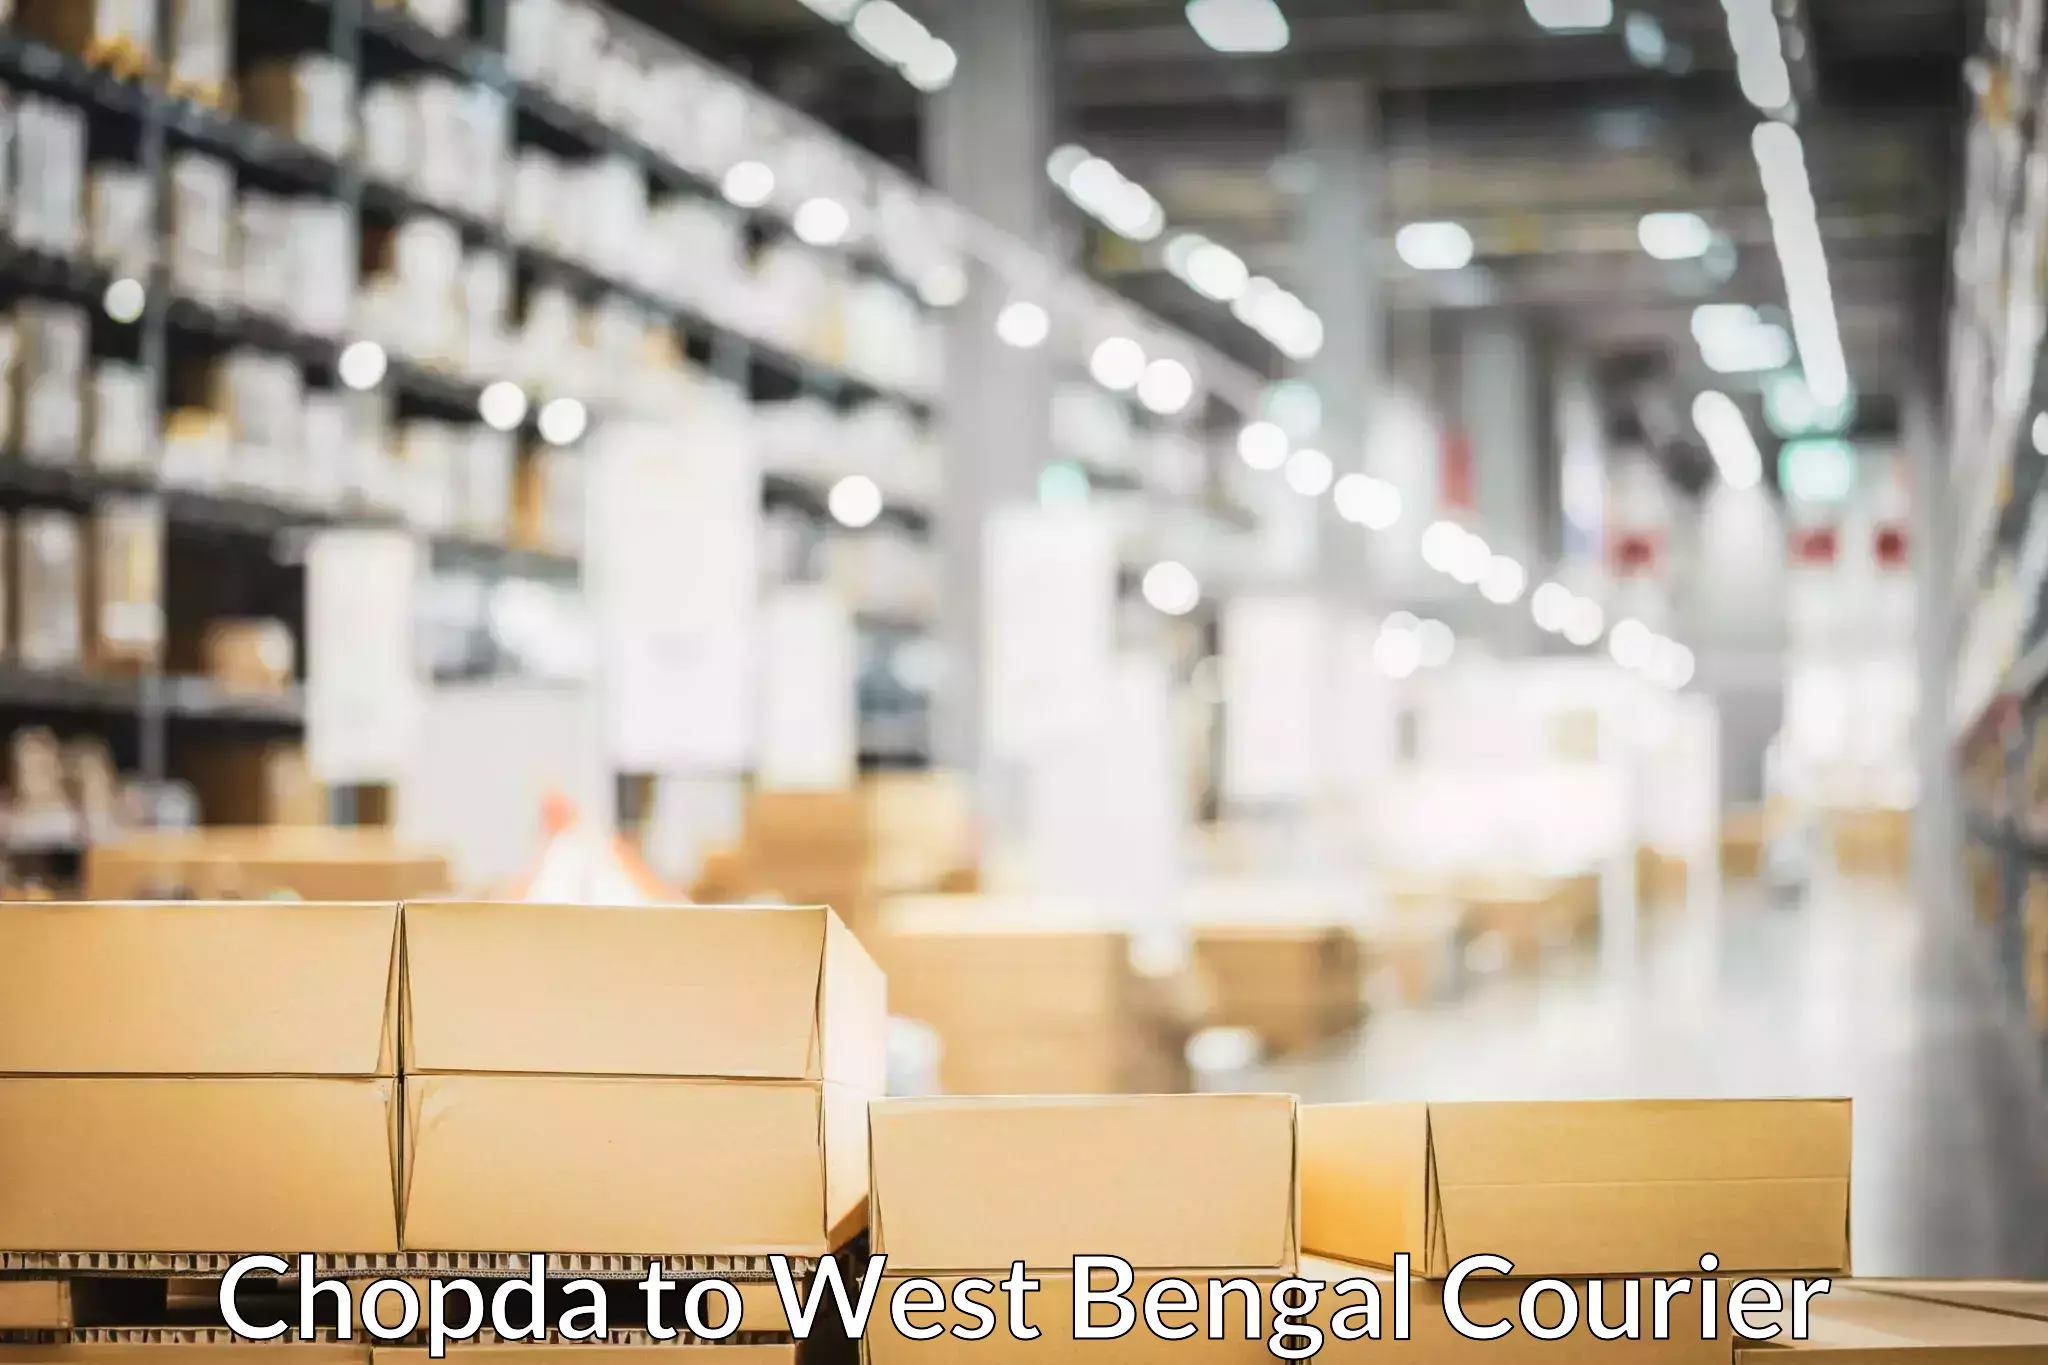 Efficient moving company Chopda to West Bengal